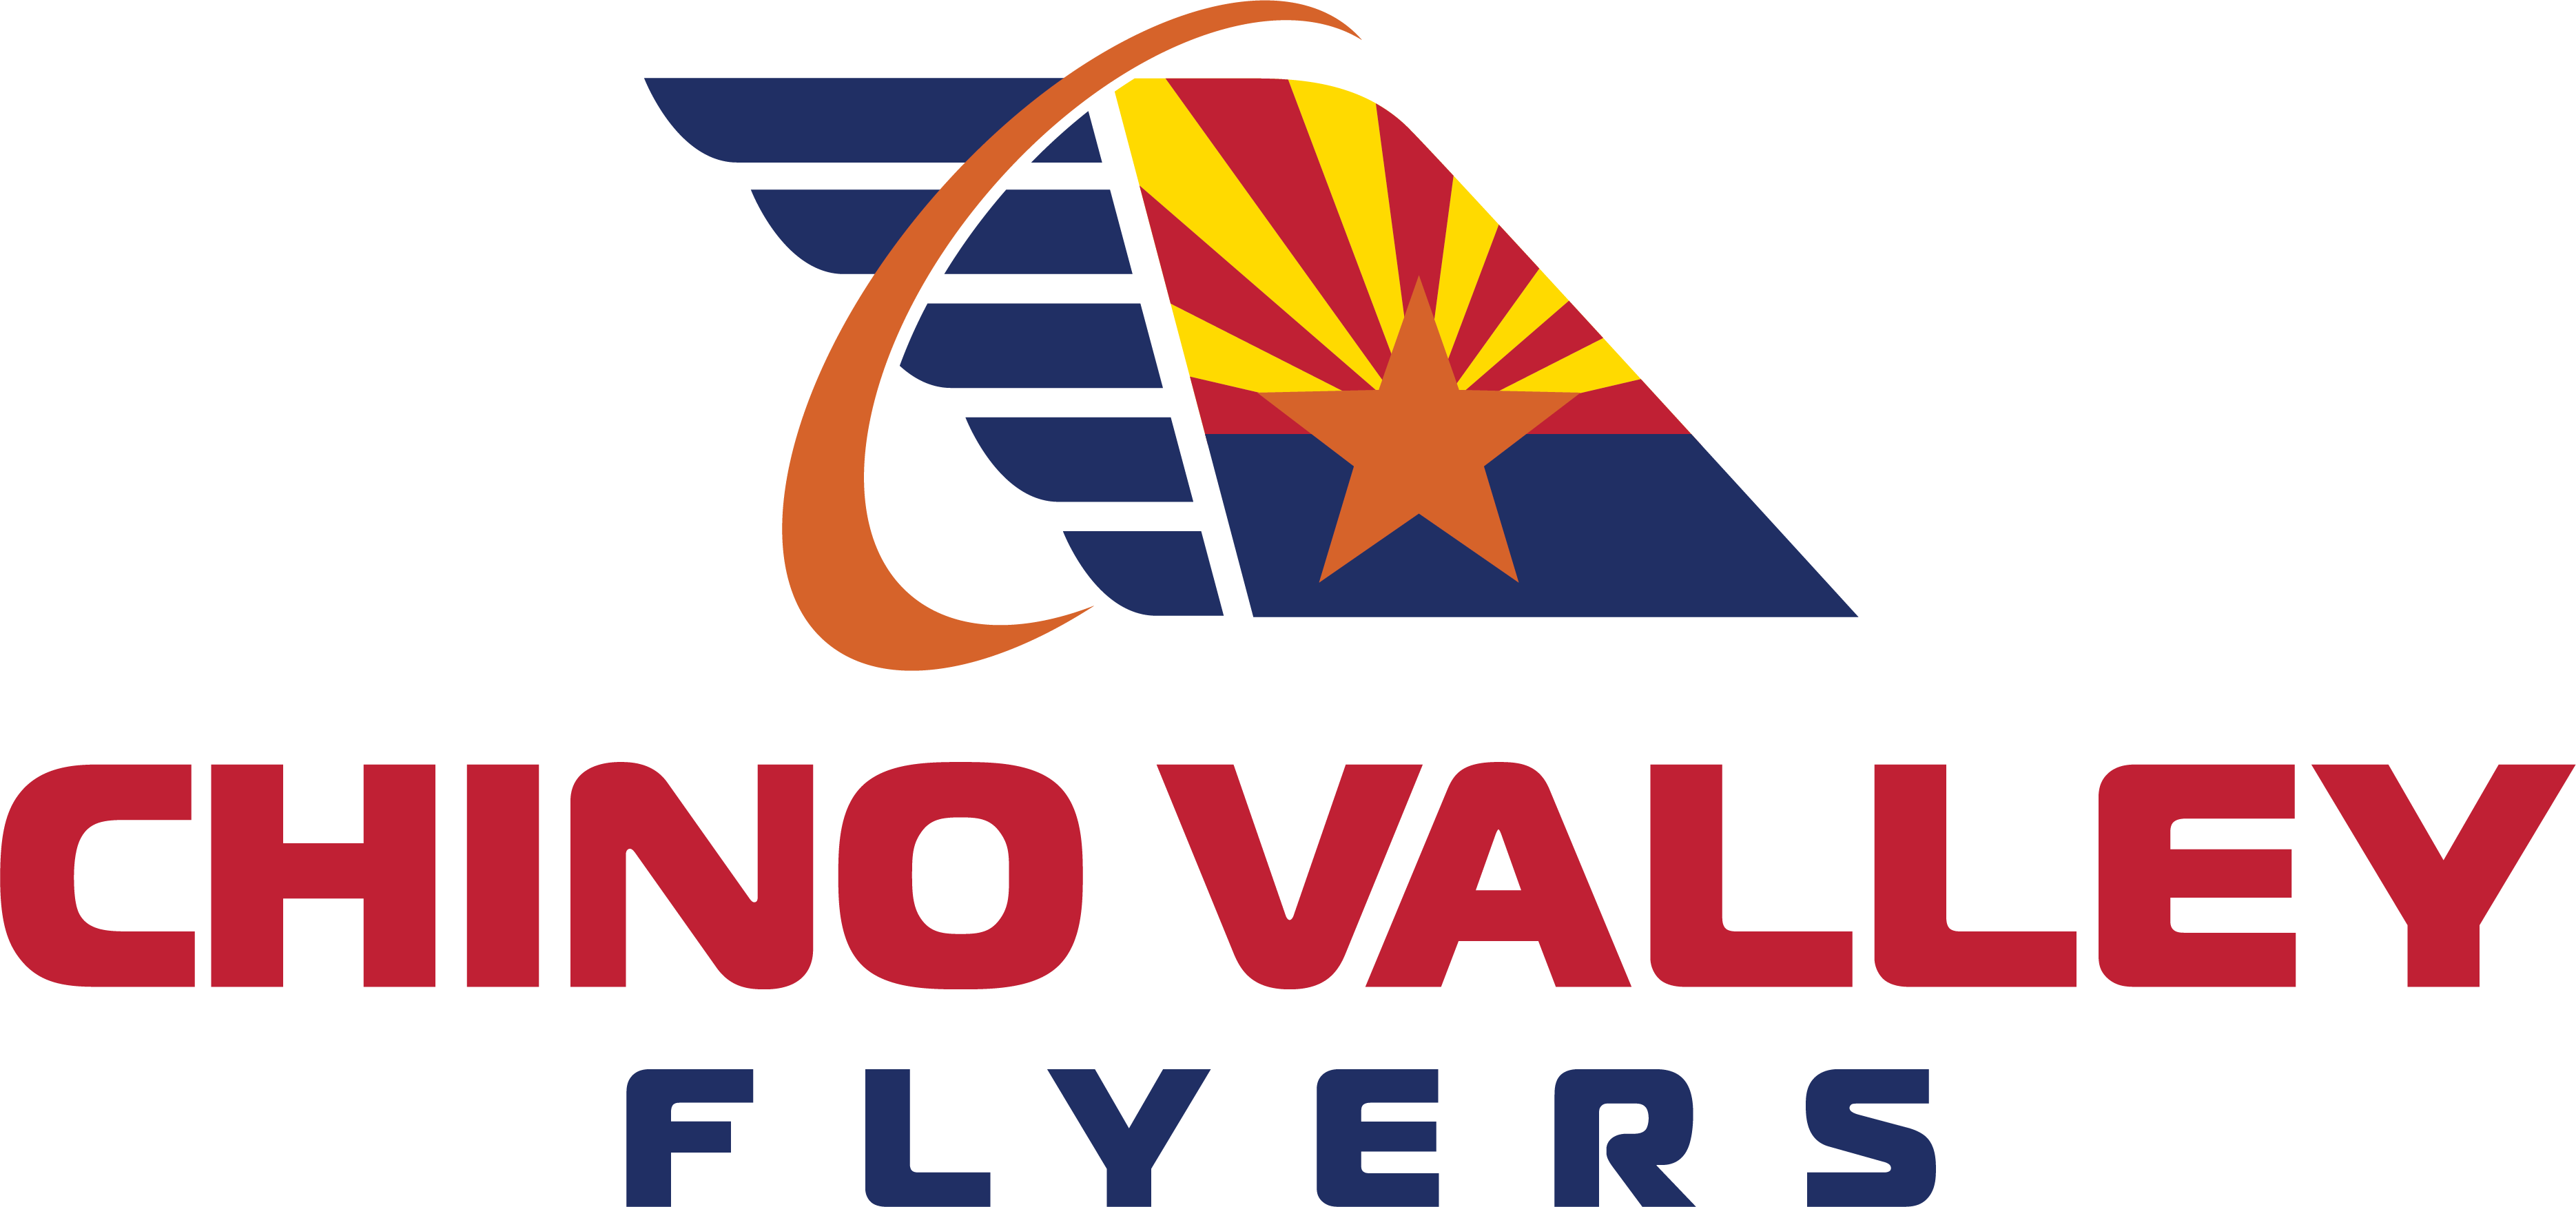 Chino Valley Flyers